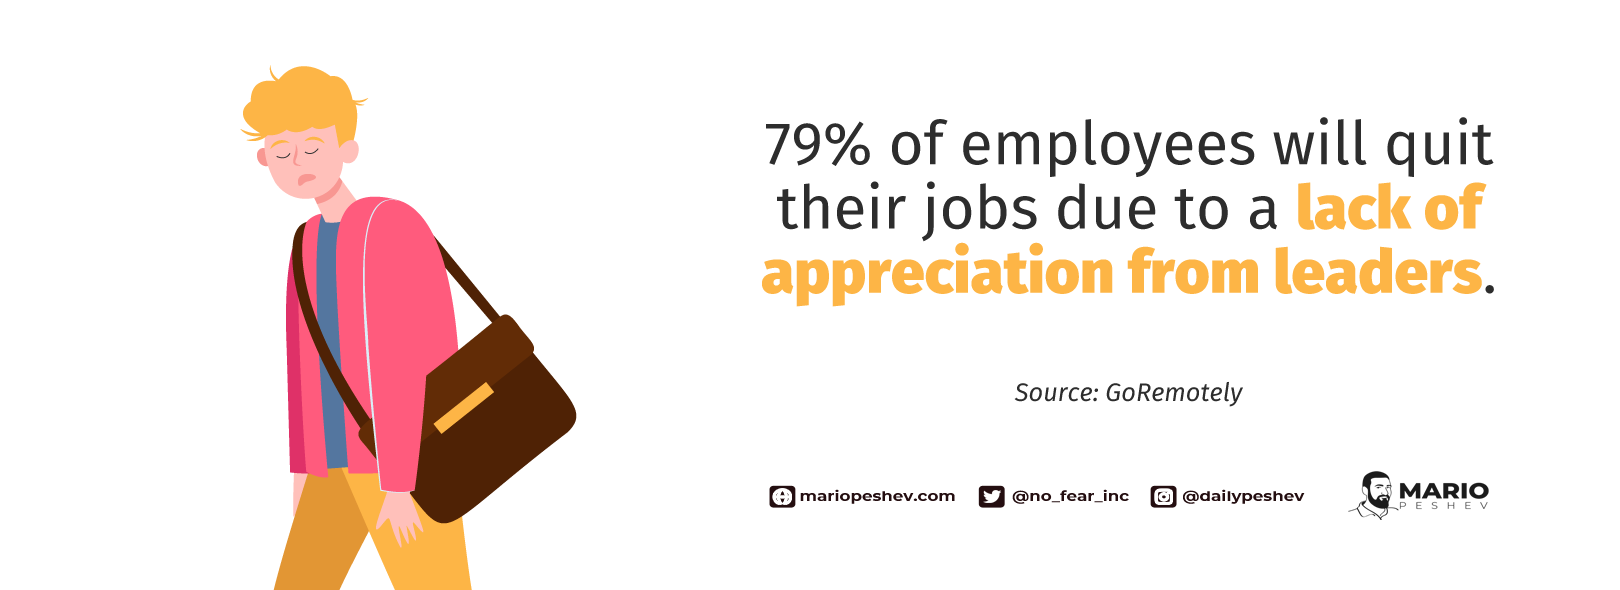 employees will quit due to lack of appreciation